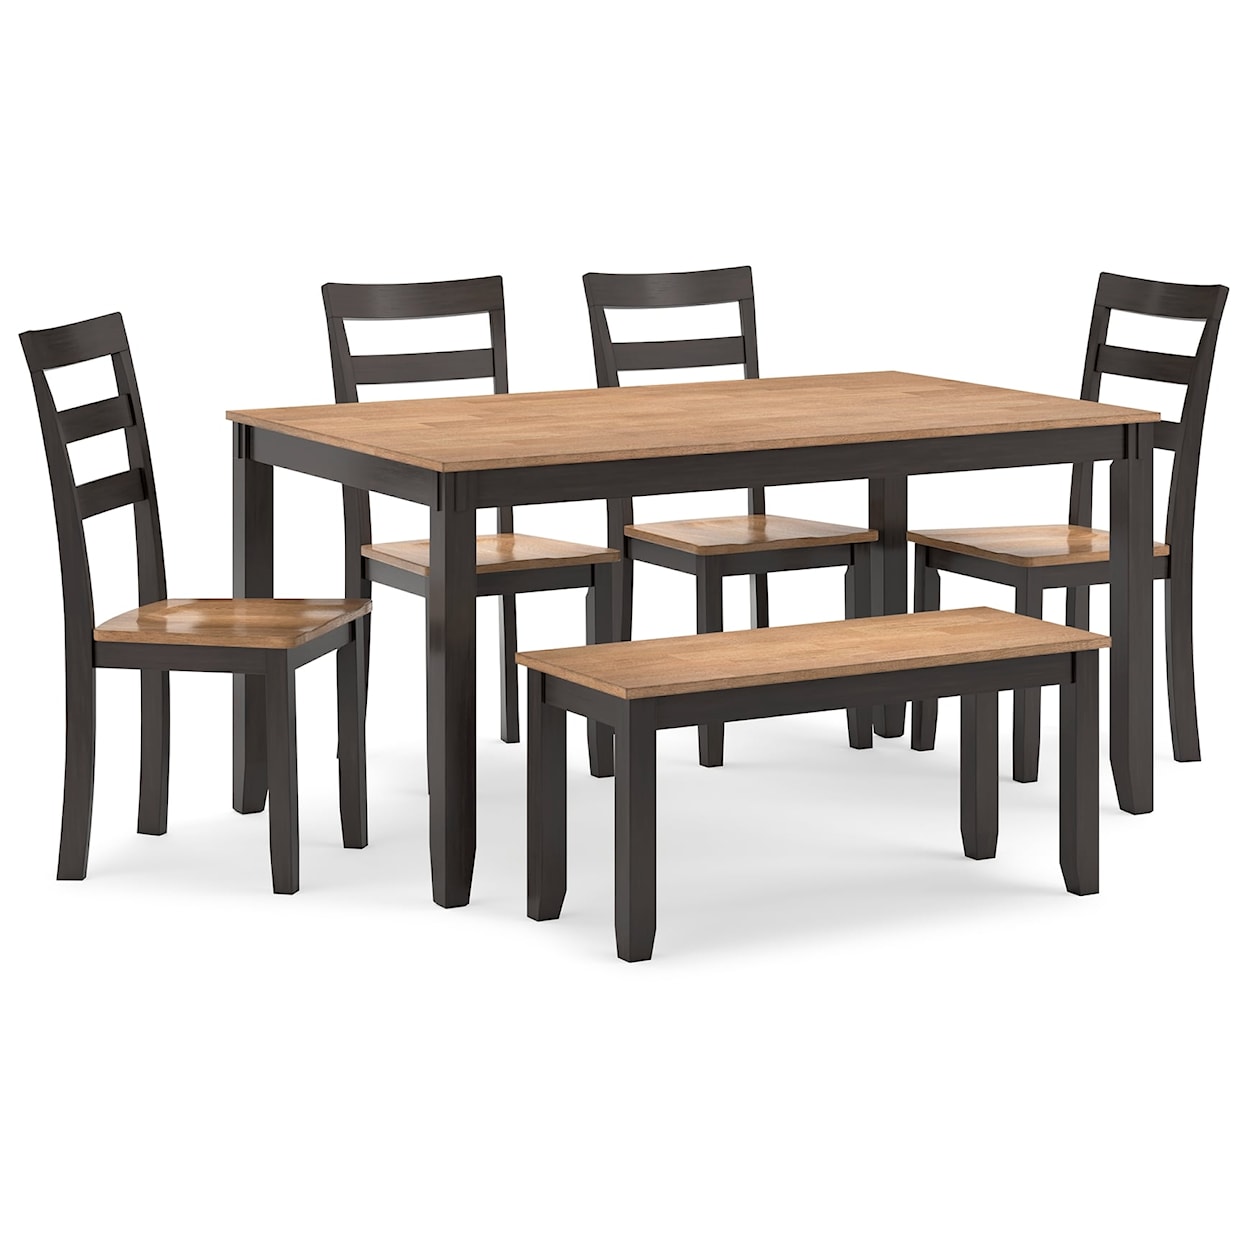 Michael Alan Select Gesthaven Dining Room Table Set (Set of 6)